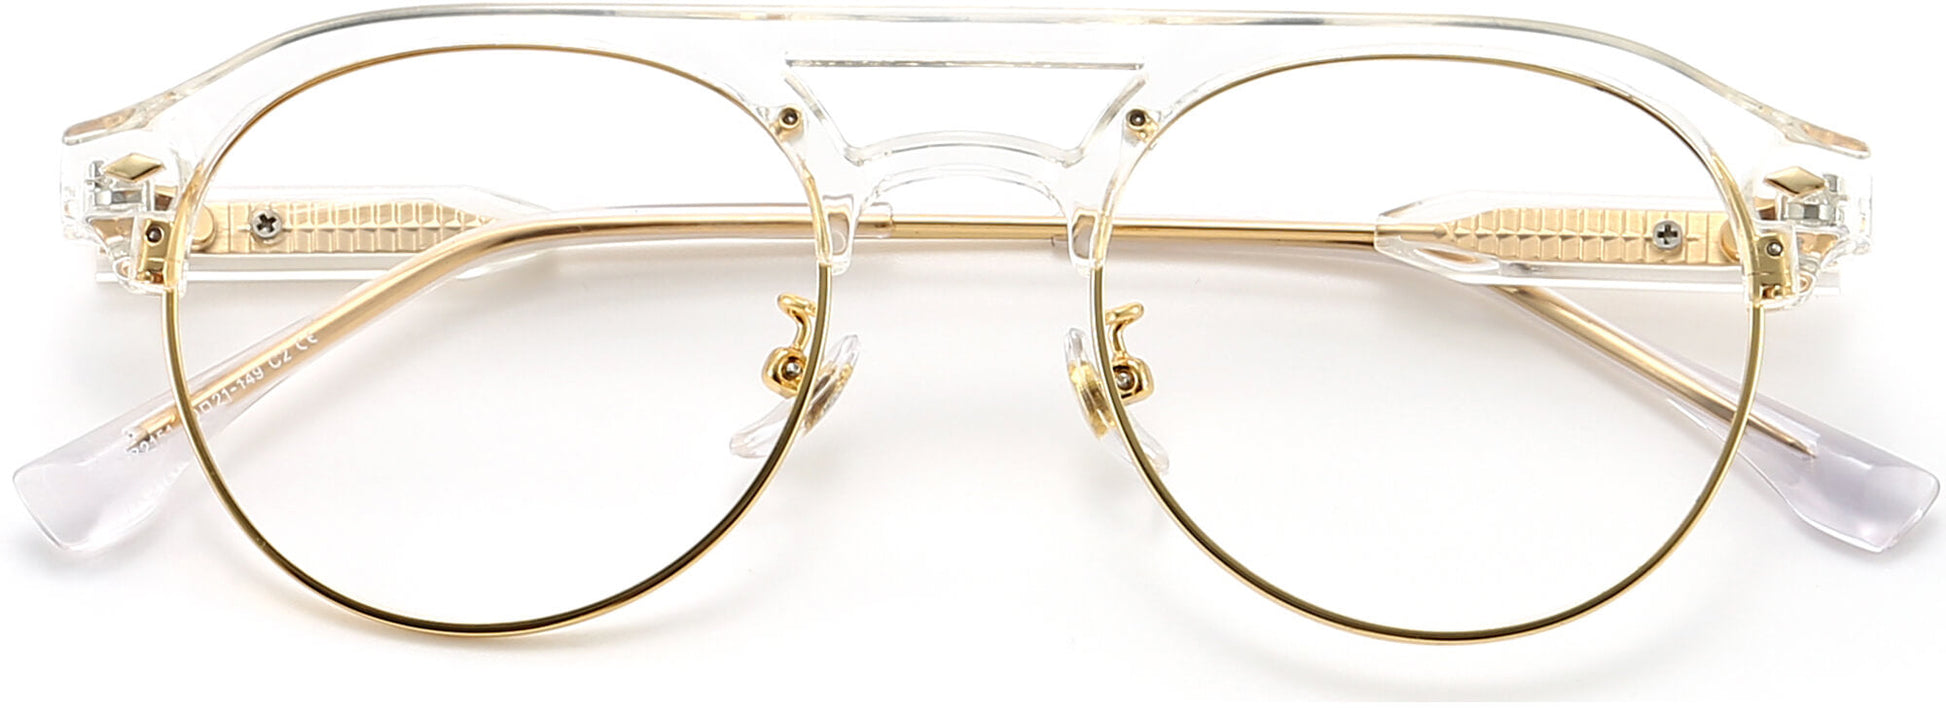 Kason Round Clear Eyeglasses from ANRRI, closed view